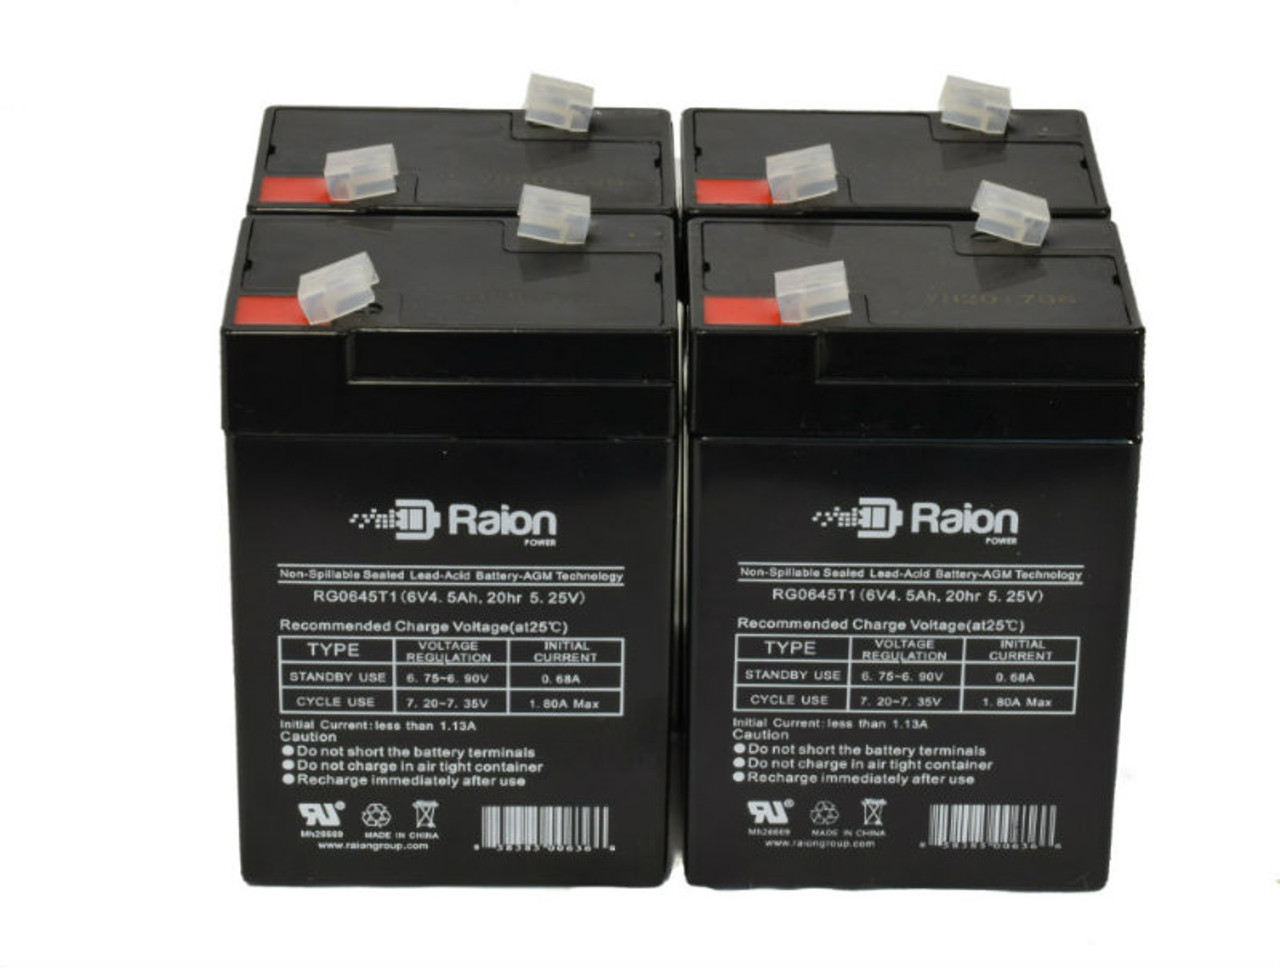 Raion Power 6V 4.5Ah Replacement Emergency Light Battery for Sure-Lites XC1 - 4 Pack